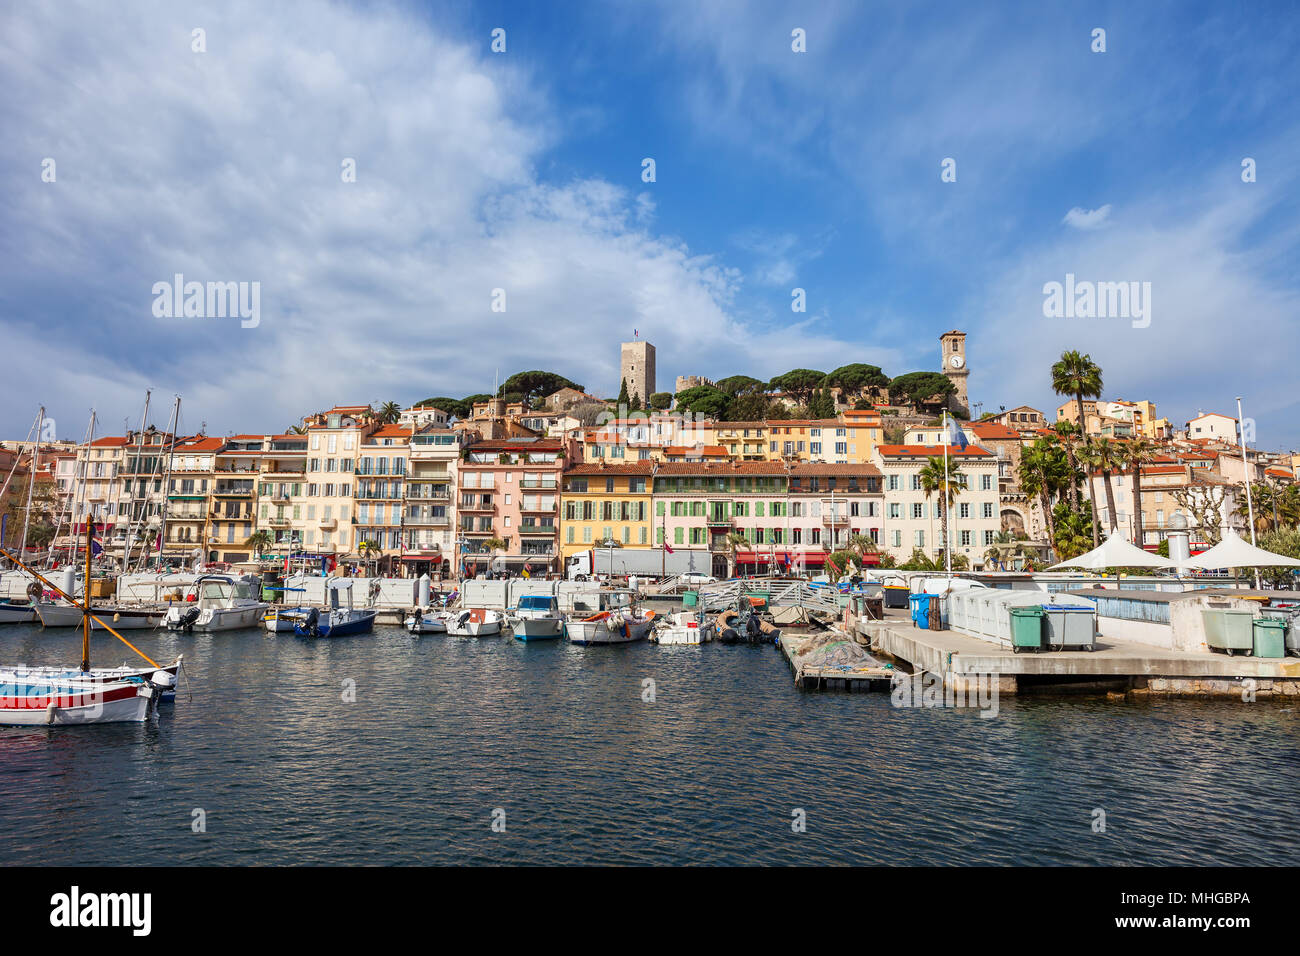 Cannes city skyline on French Riviera in France, Le Suquet old town from Le Vieux port Stock Photo